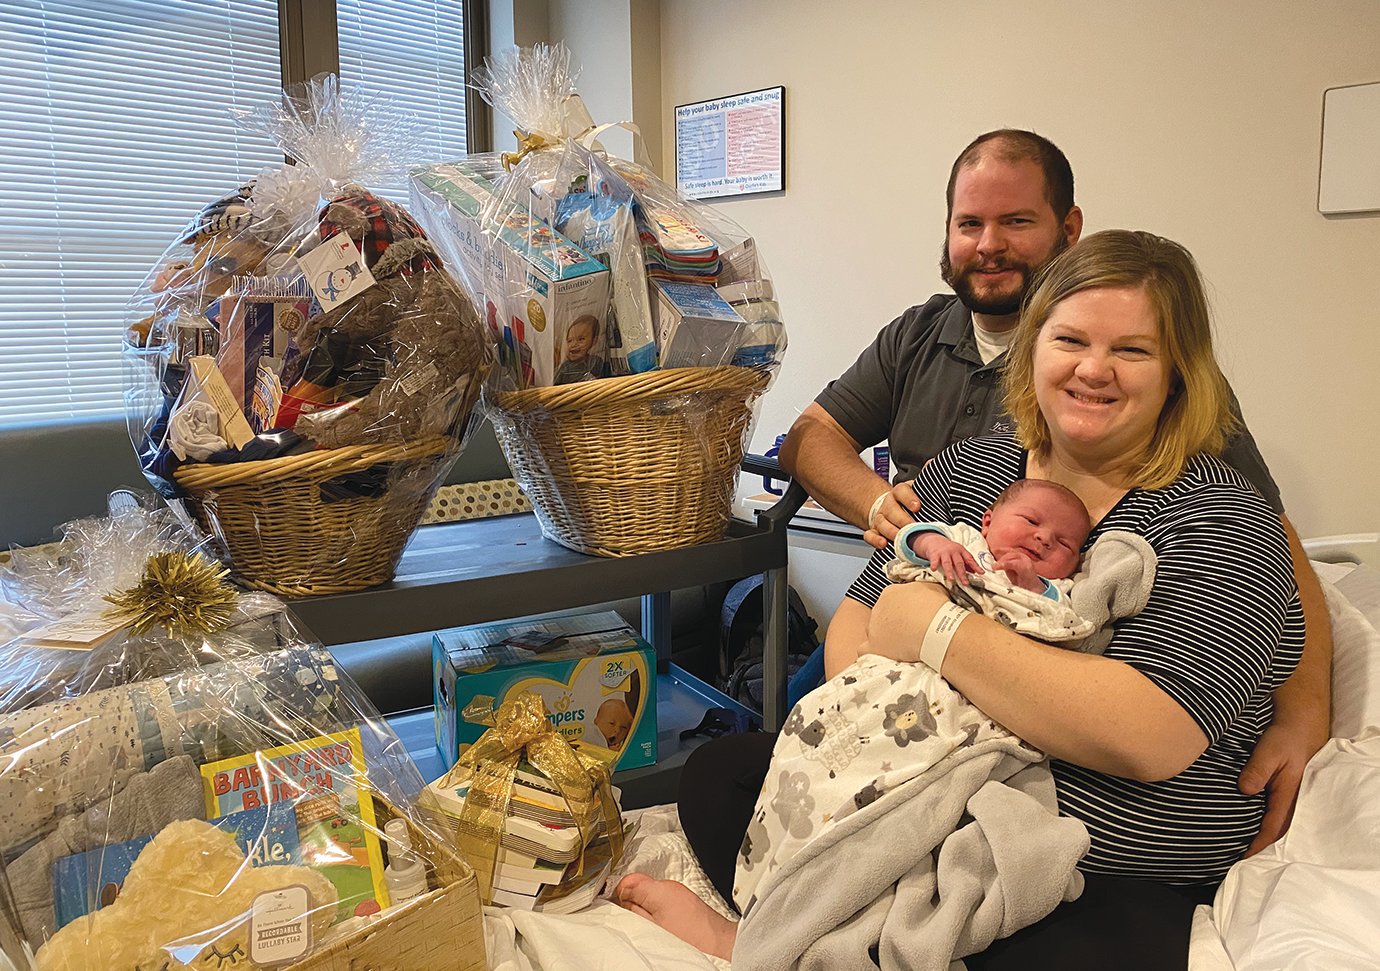 Elizabeth and Gabe Gohier, Advance, delivered the first baby of the new year at Witham Health Services, Lebanon. Mathieu Alexandre Gohier was born at 3:03 p.m. Friday. At birth, he weighed 9 pounds, 13 ounces.